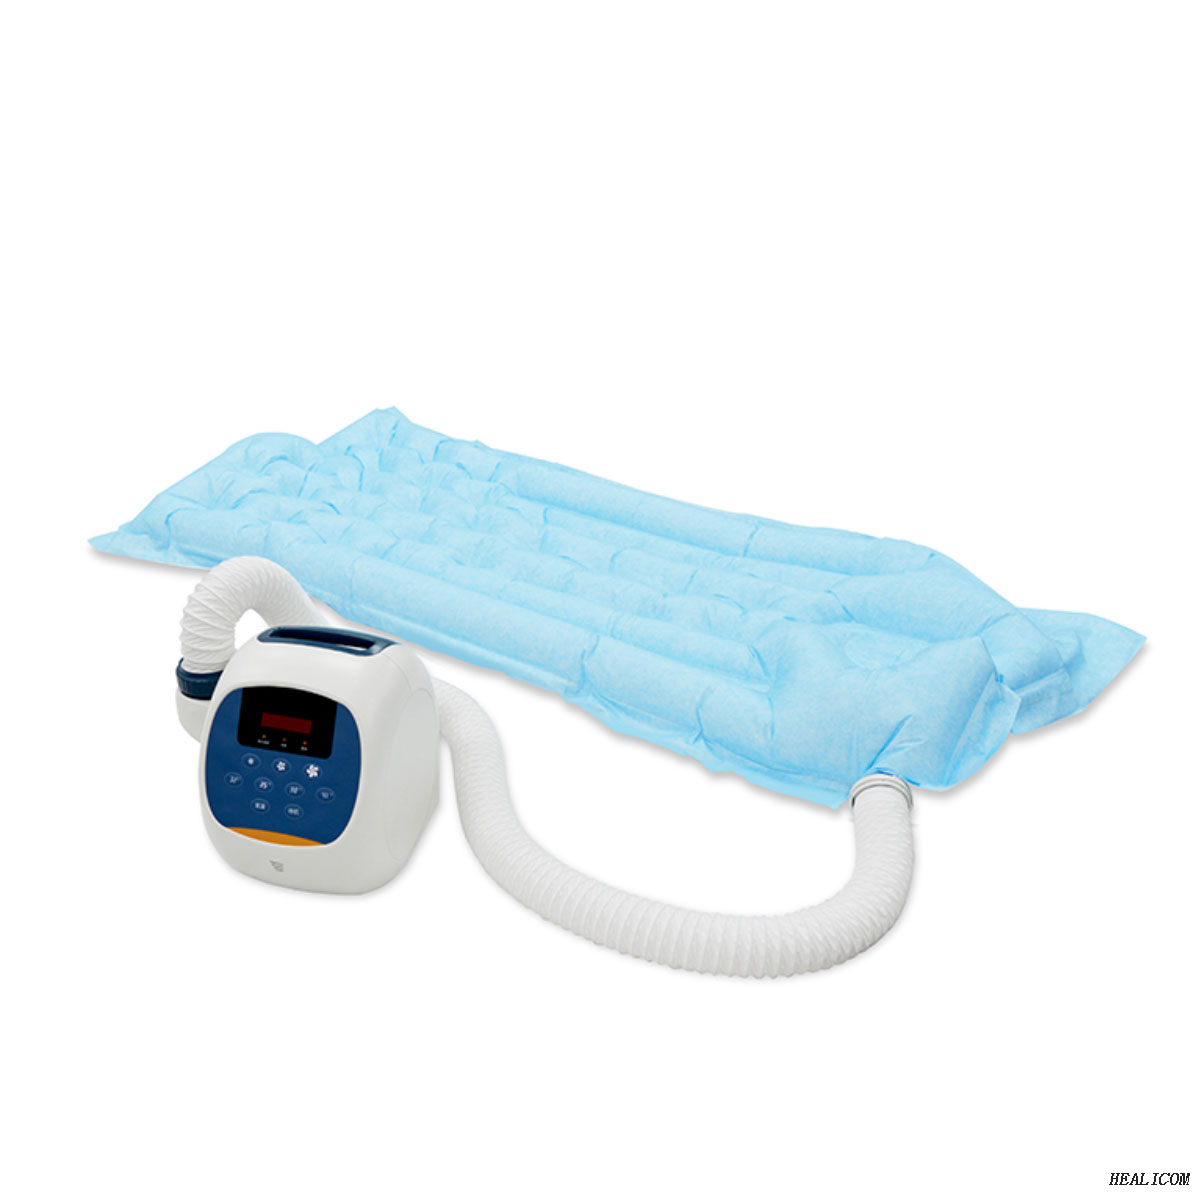 Medical HC-200 Heating Patient Warming Blankets Patient Warming Blanket